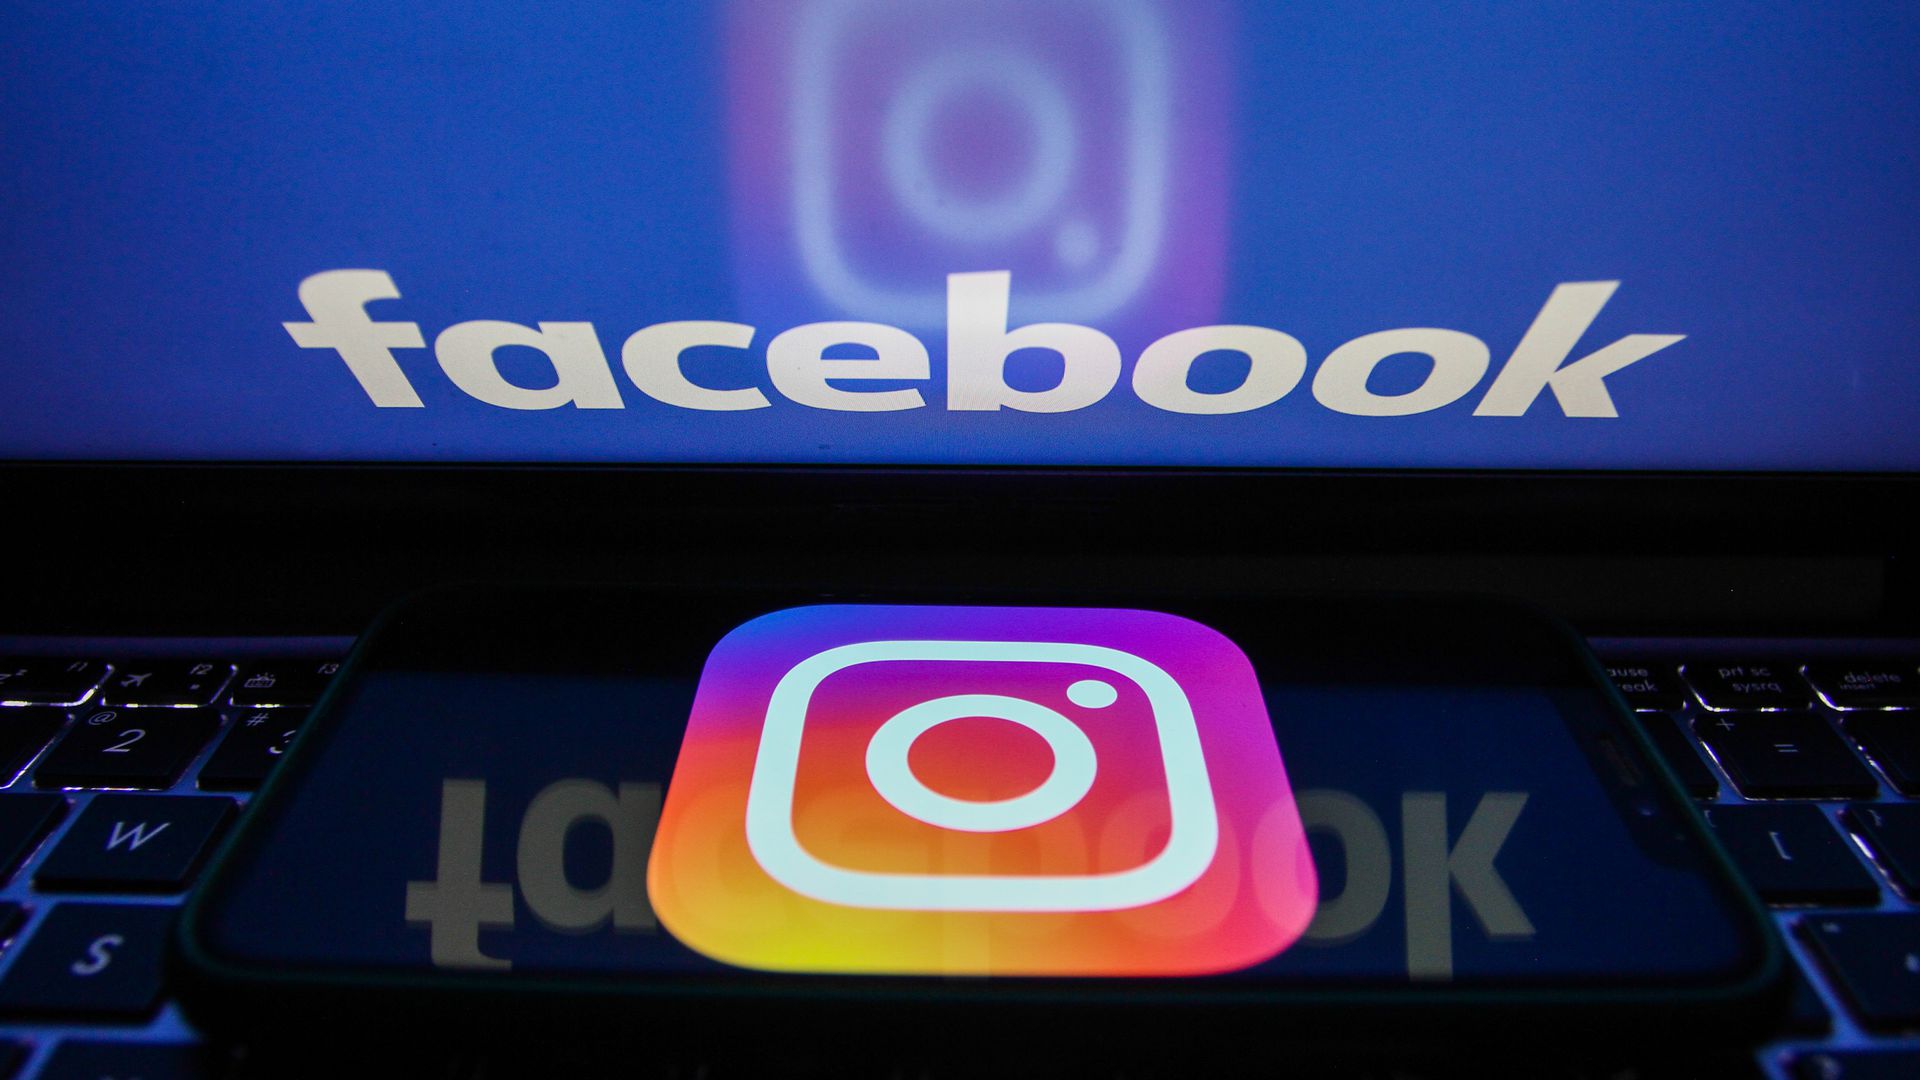 Facebook, Instagram and WhatsApp coming back online after widespread outage